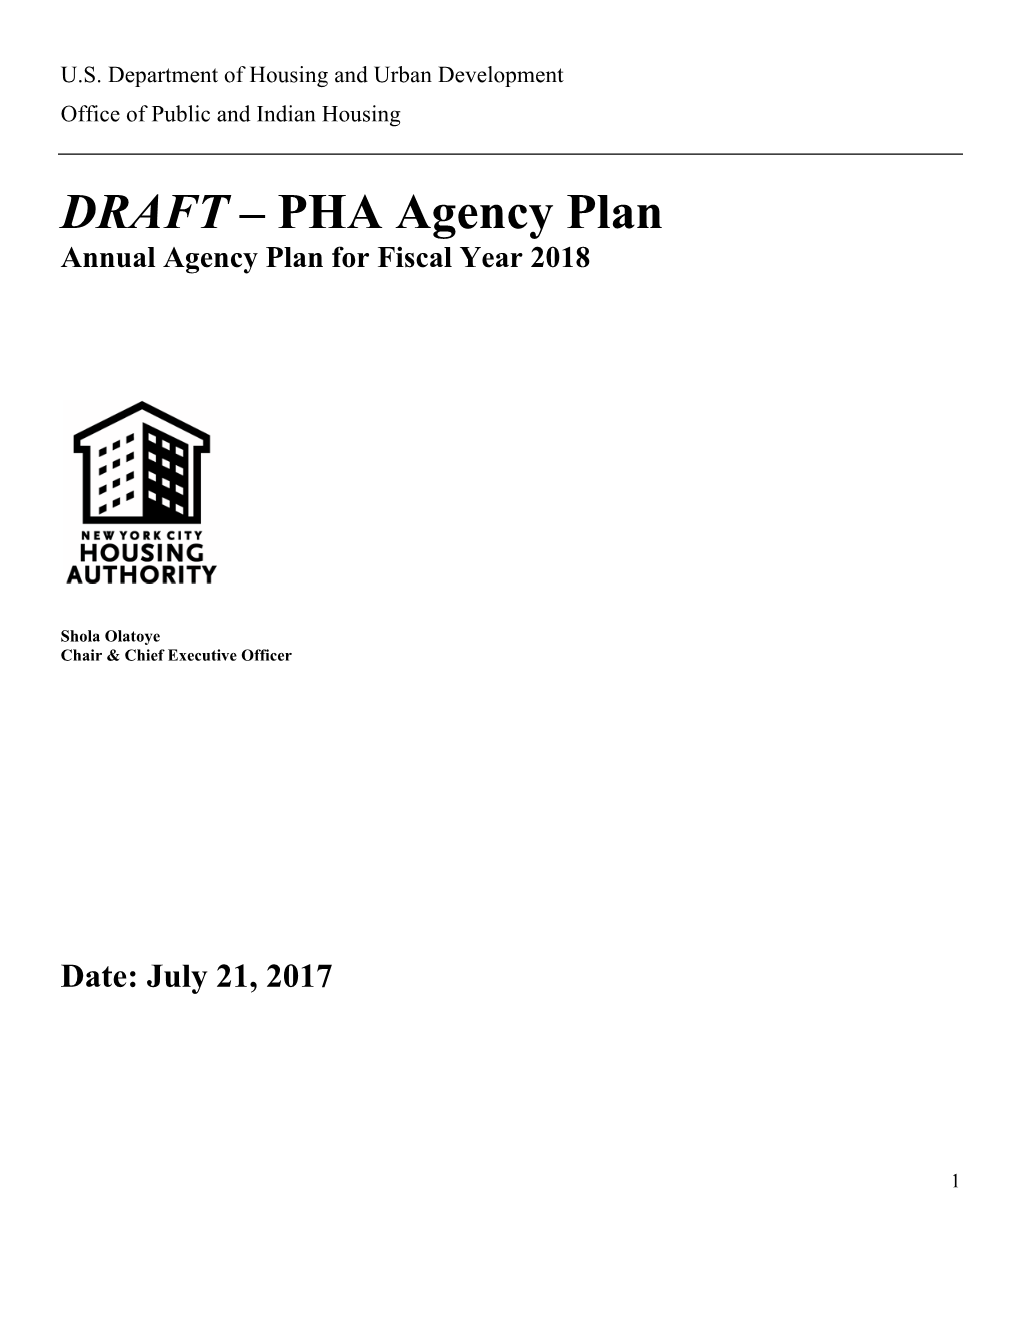 DRAFT – PHA Agency Plan Annual Agency Plan for Fiscal Year 2018